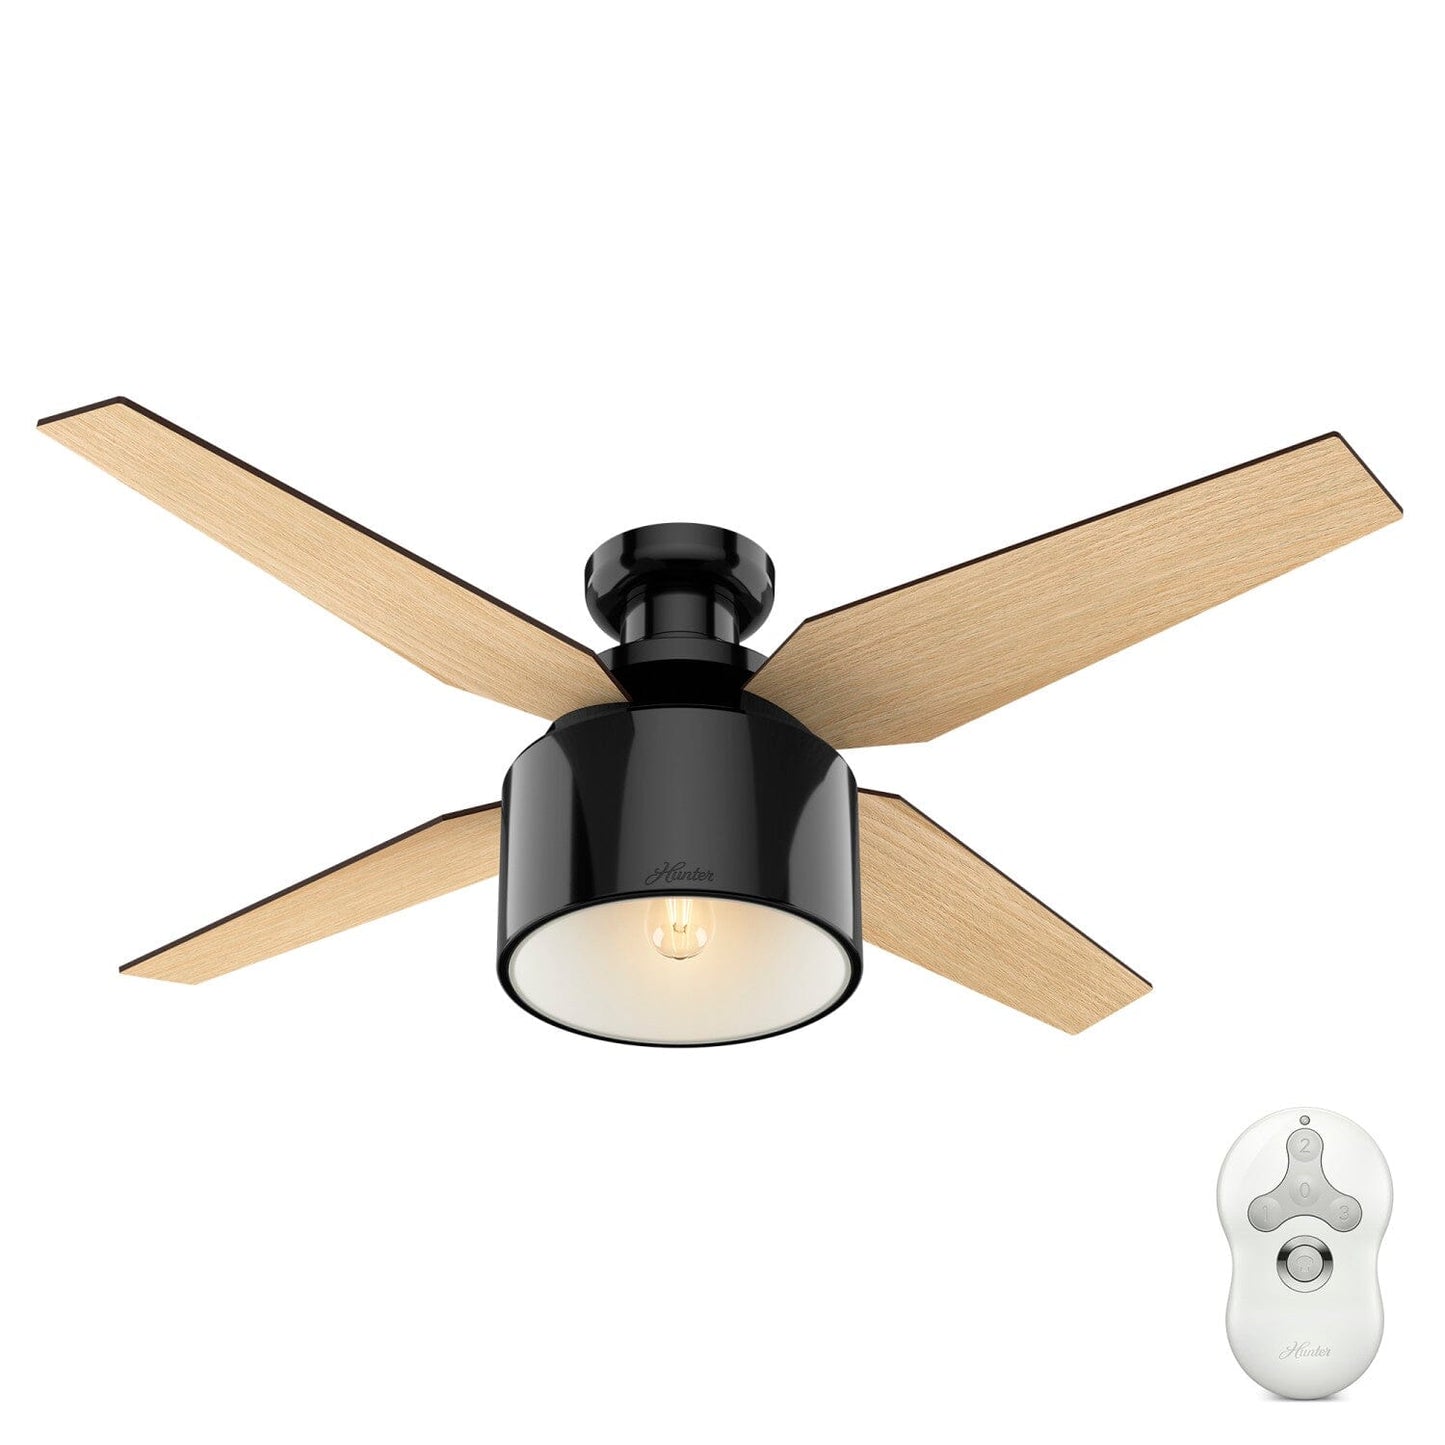 Cranbrook Low Profile with Light 52 inch Ceiling Fans Hunter Gloss Black - Mid Century Walnut 